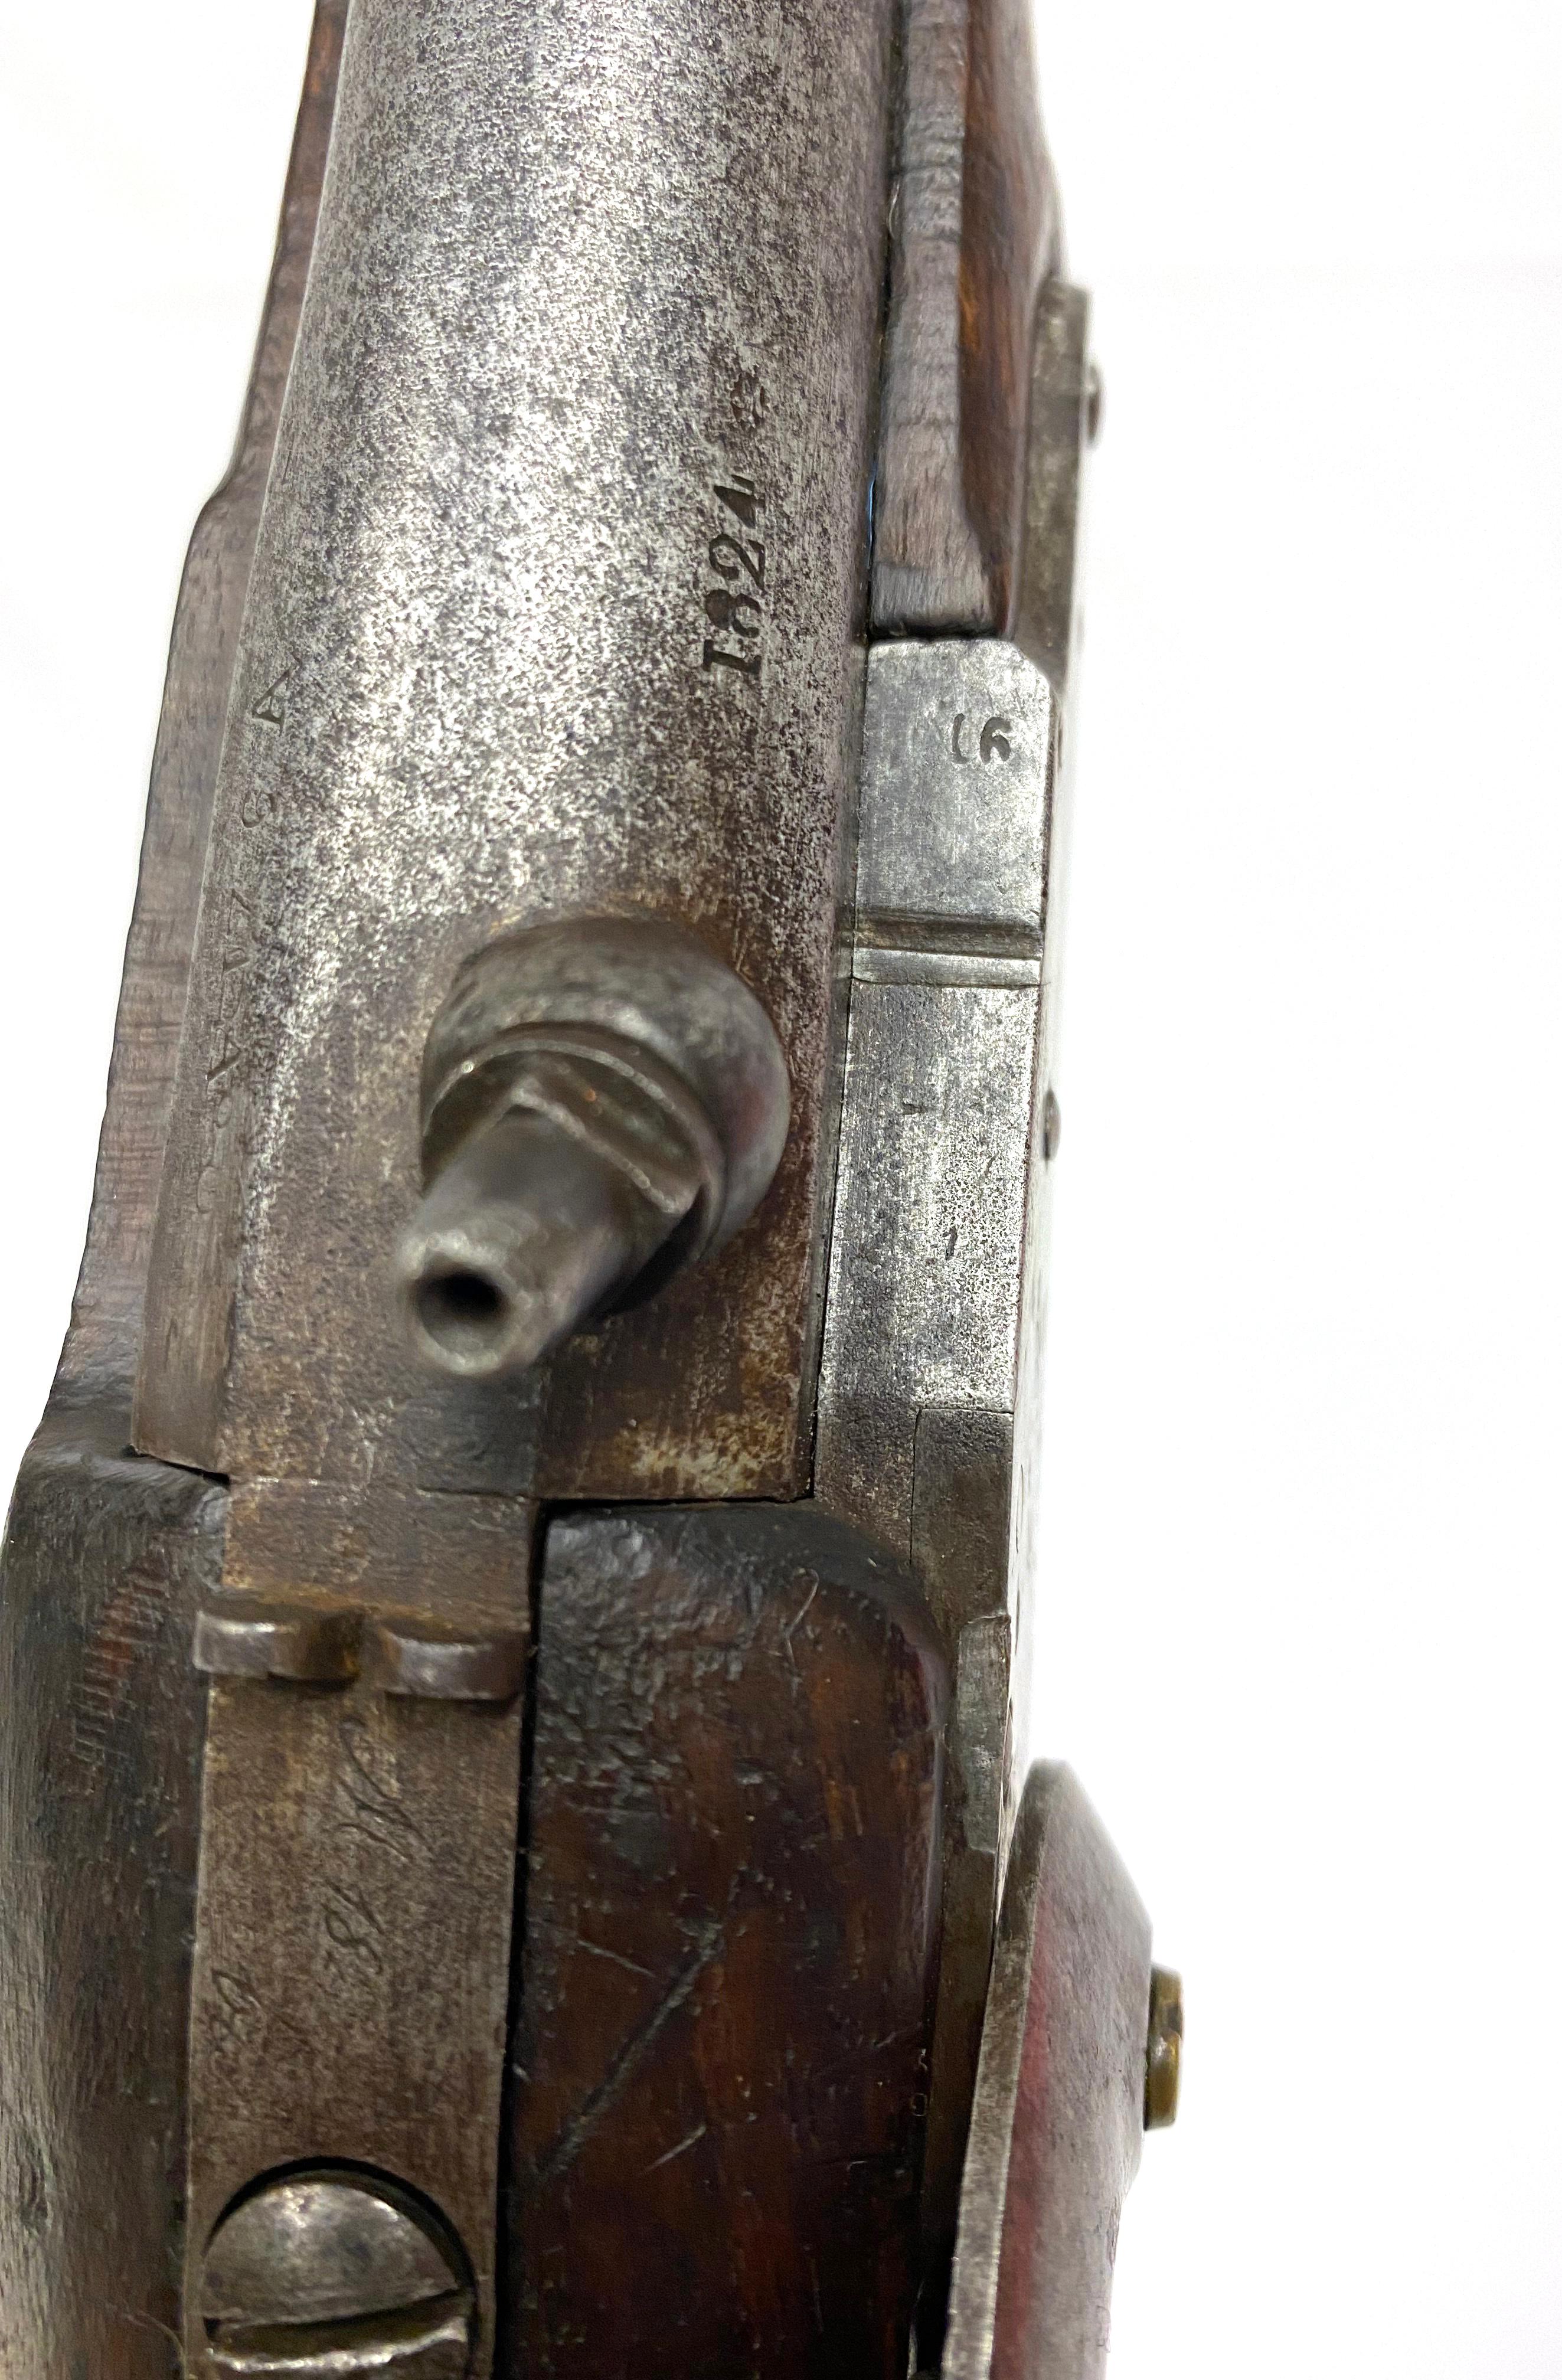 Original French Model 1822 T Bis Single Percussion Pistol by Charleville dated 1824